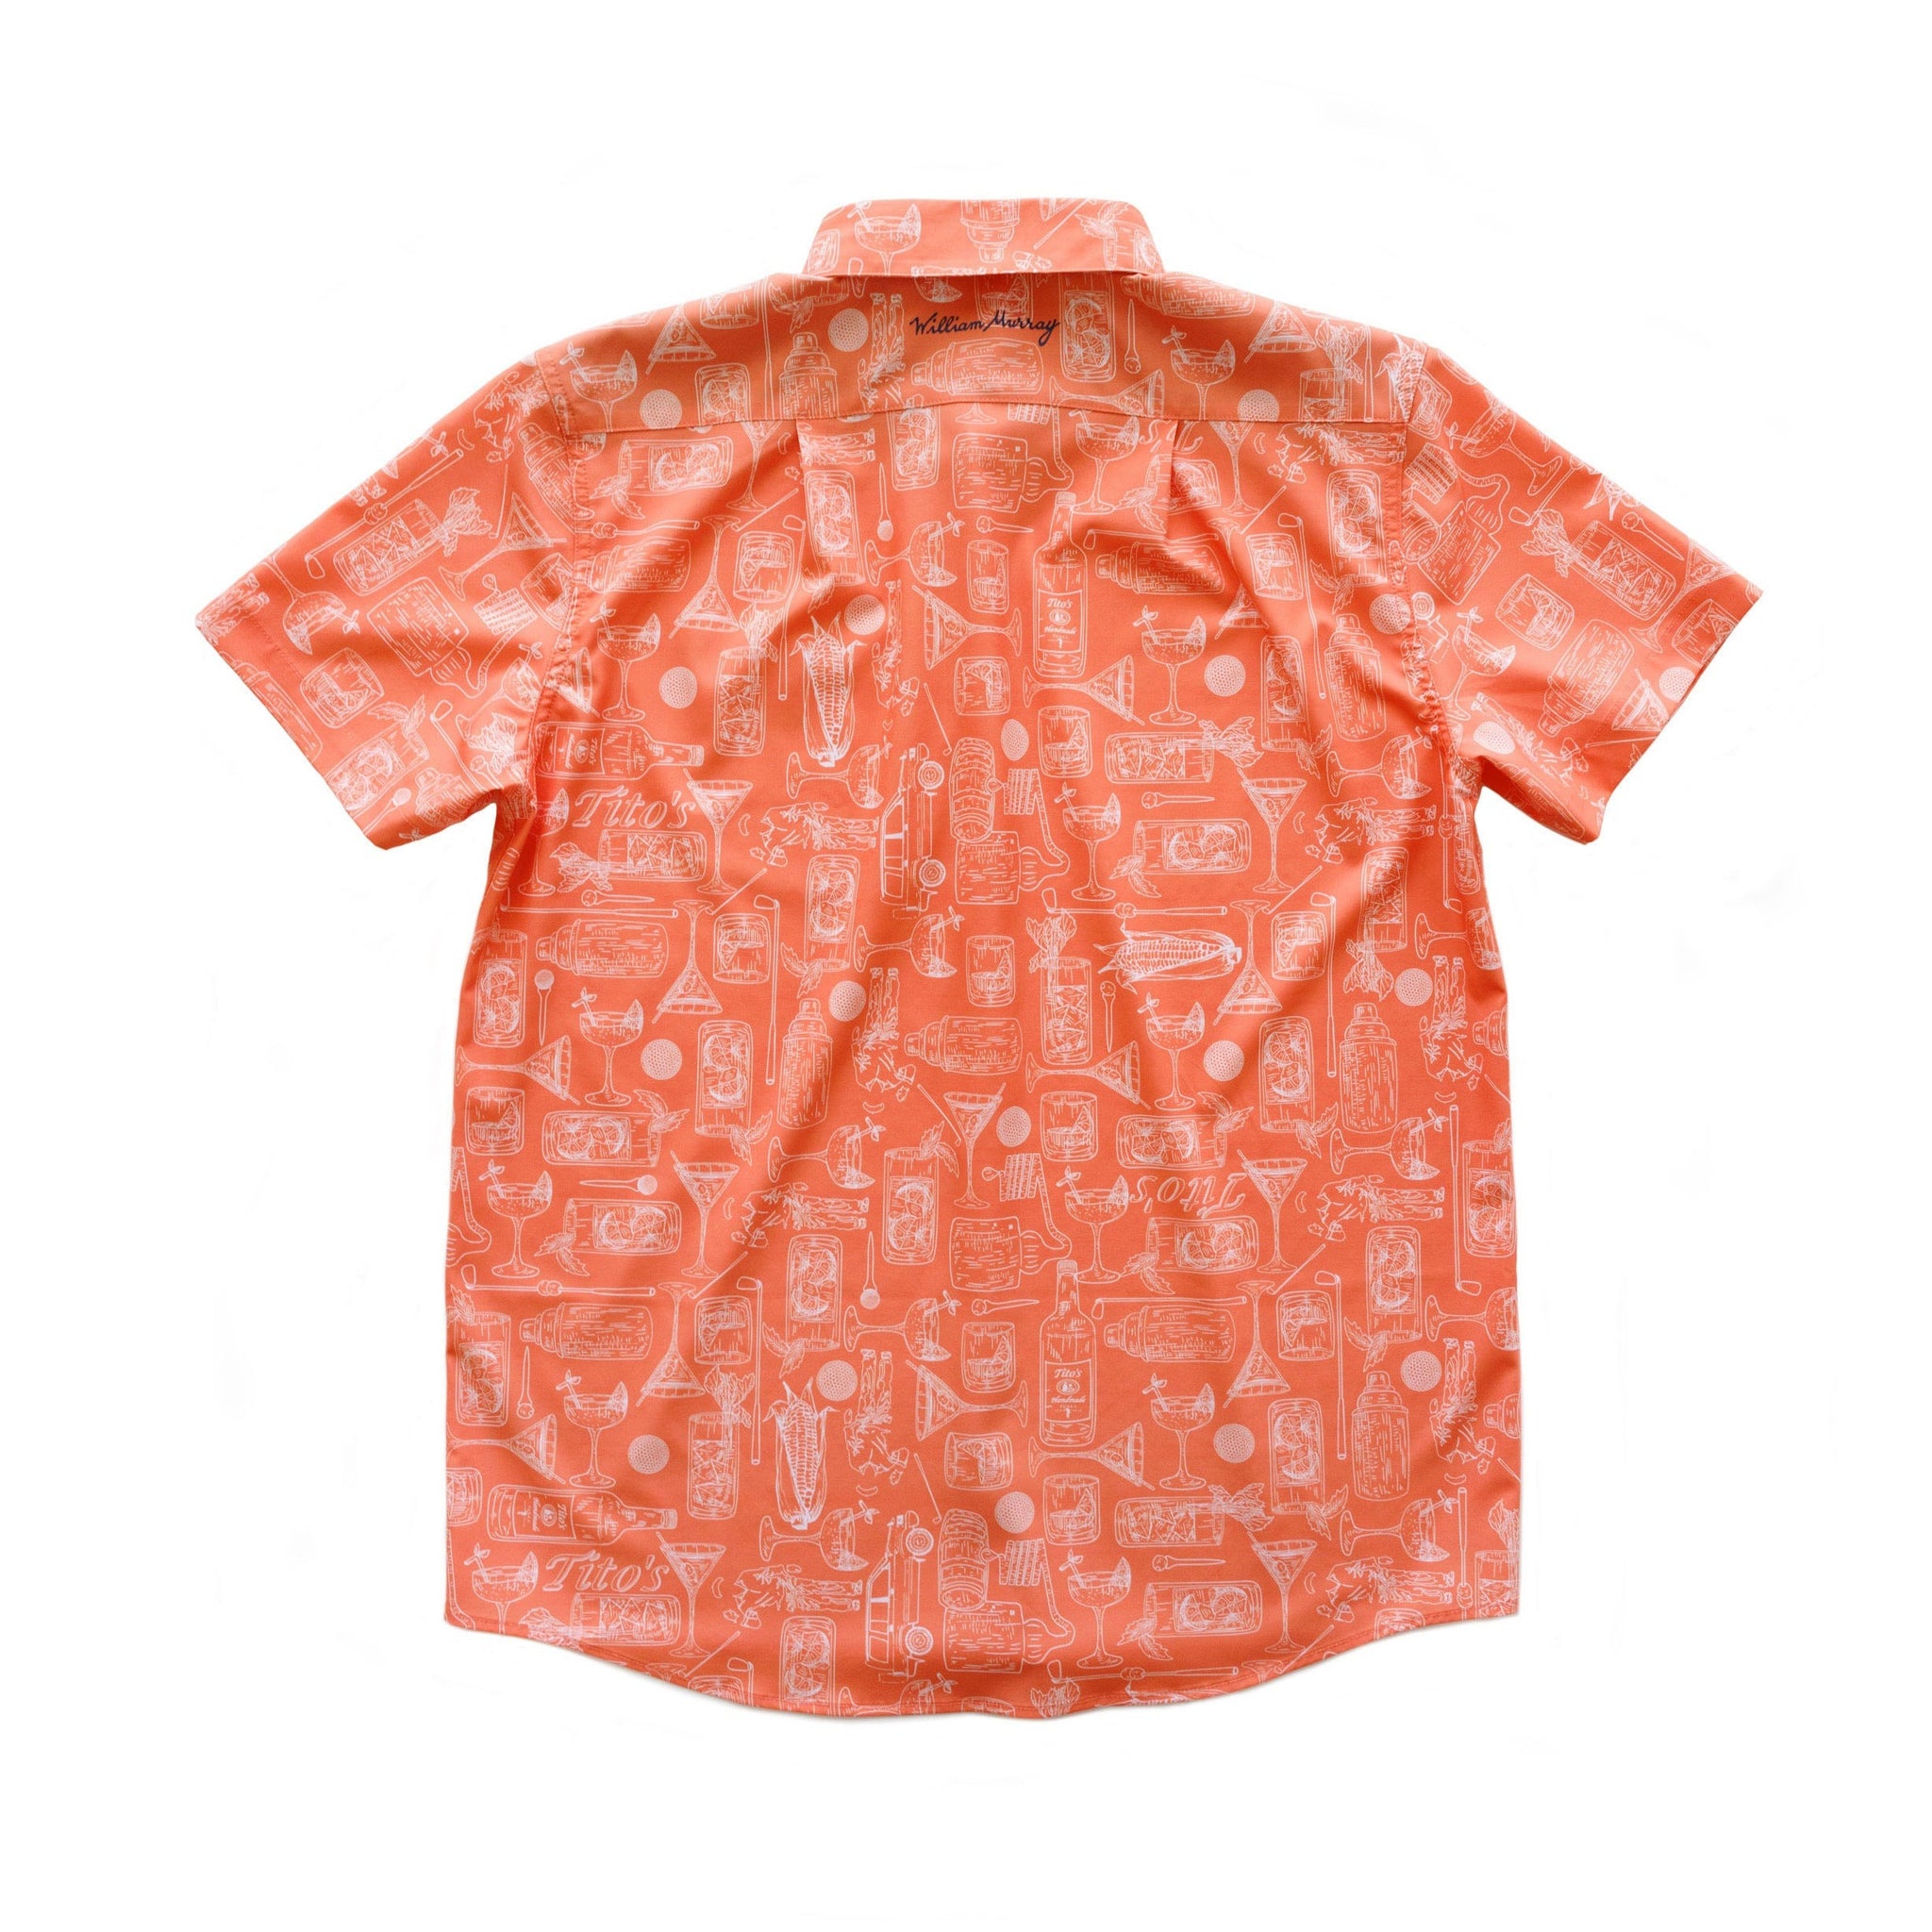 Back of coral Recipe for Success Button Down with Tito’s Handmade Vodka and cocktail illustrations